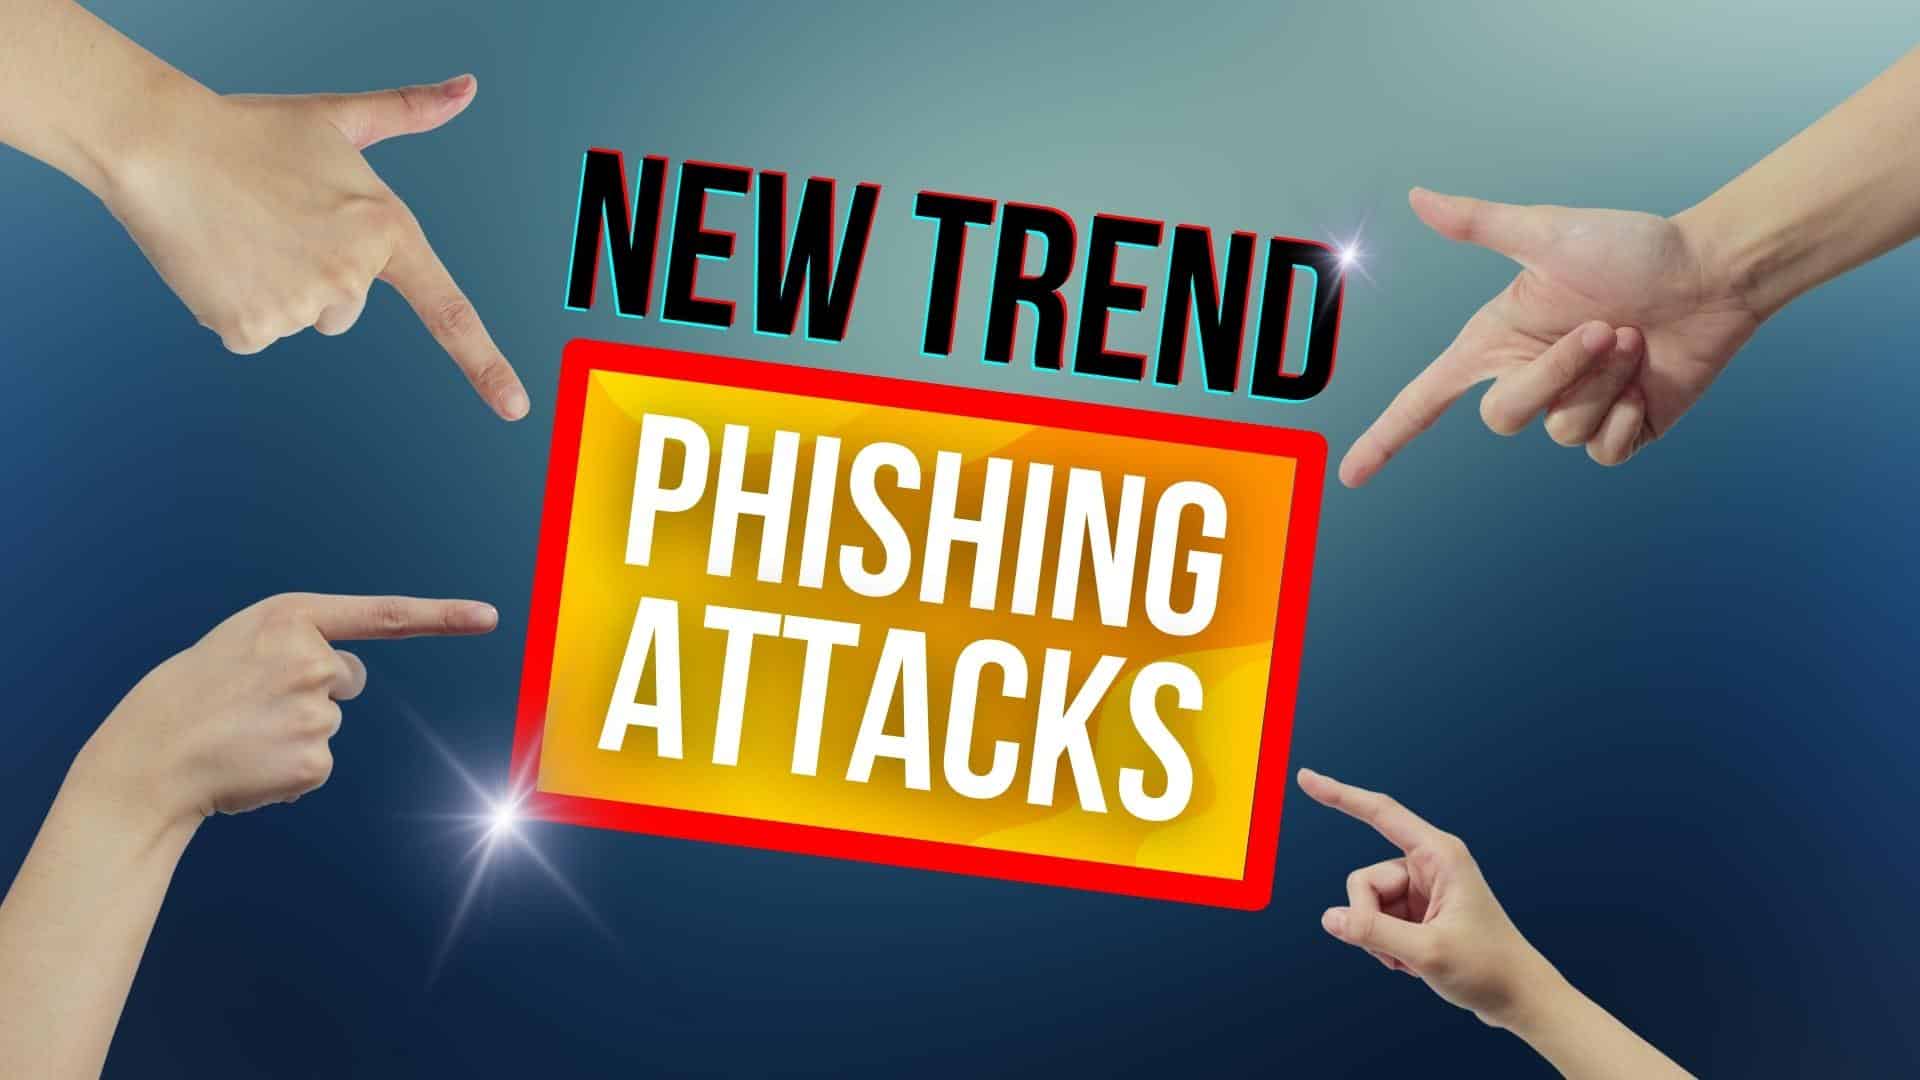 The latest trend in phishing attacks